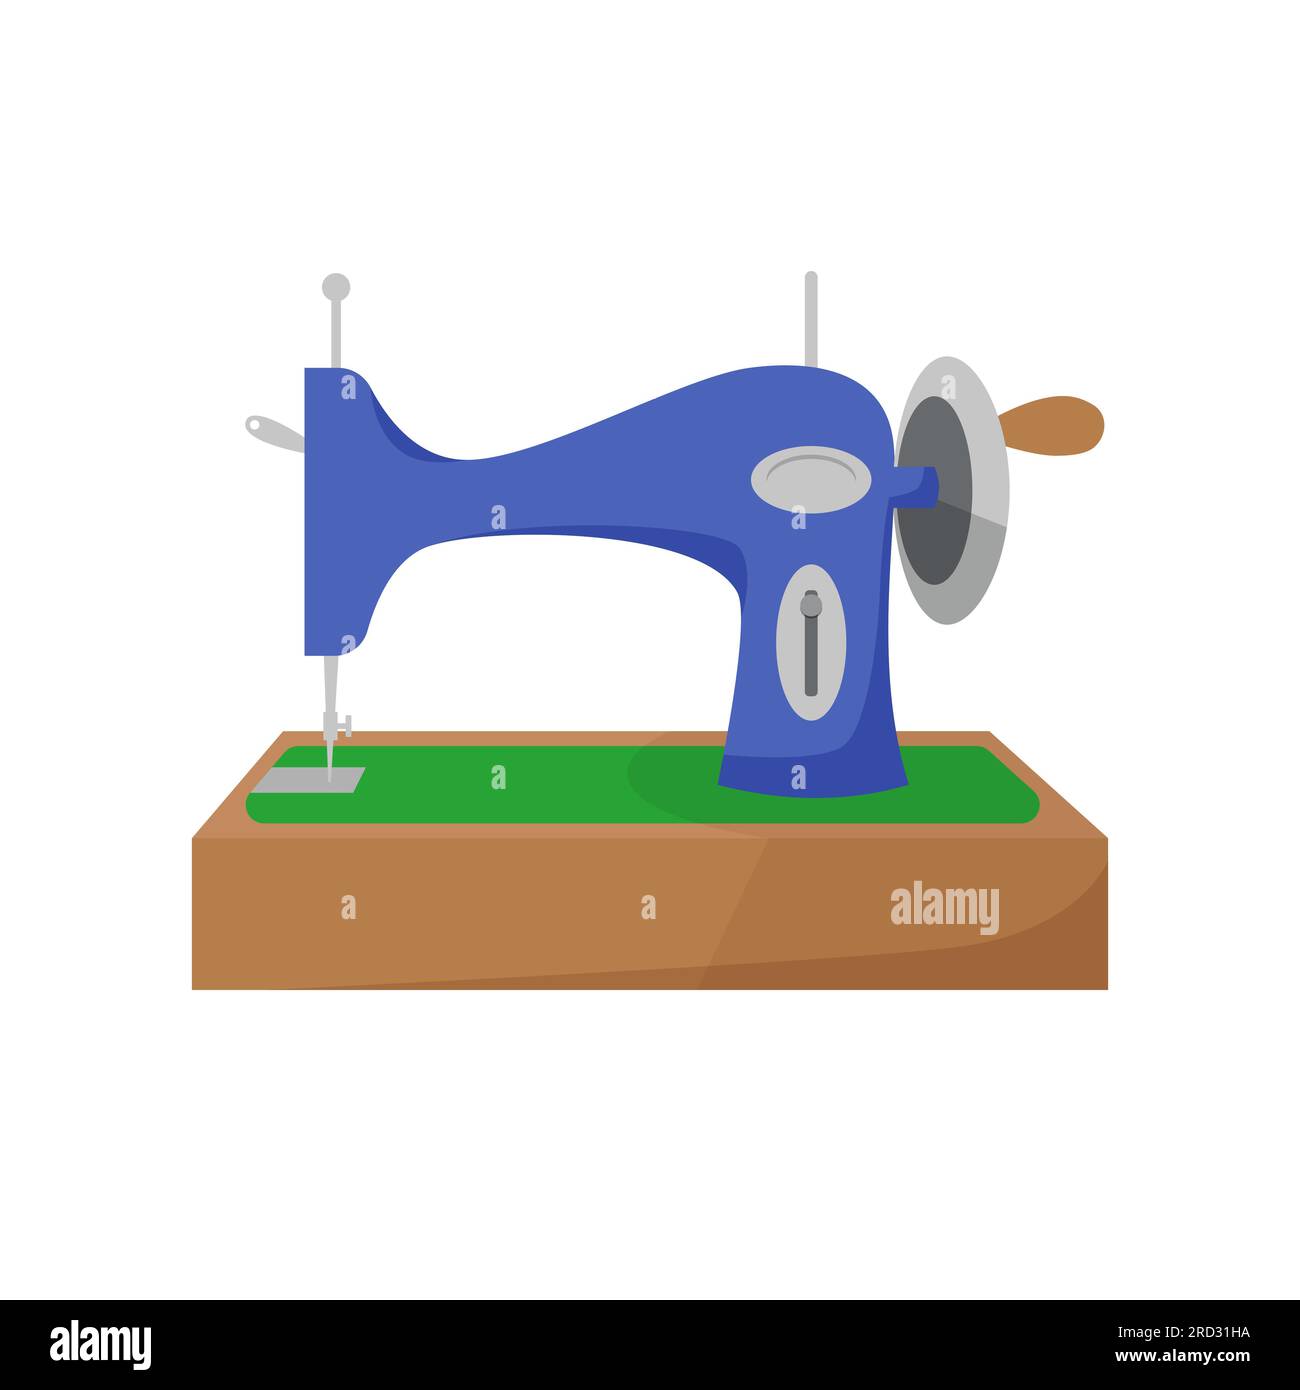 Sewing machine illustration Stock Vector